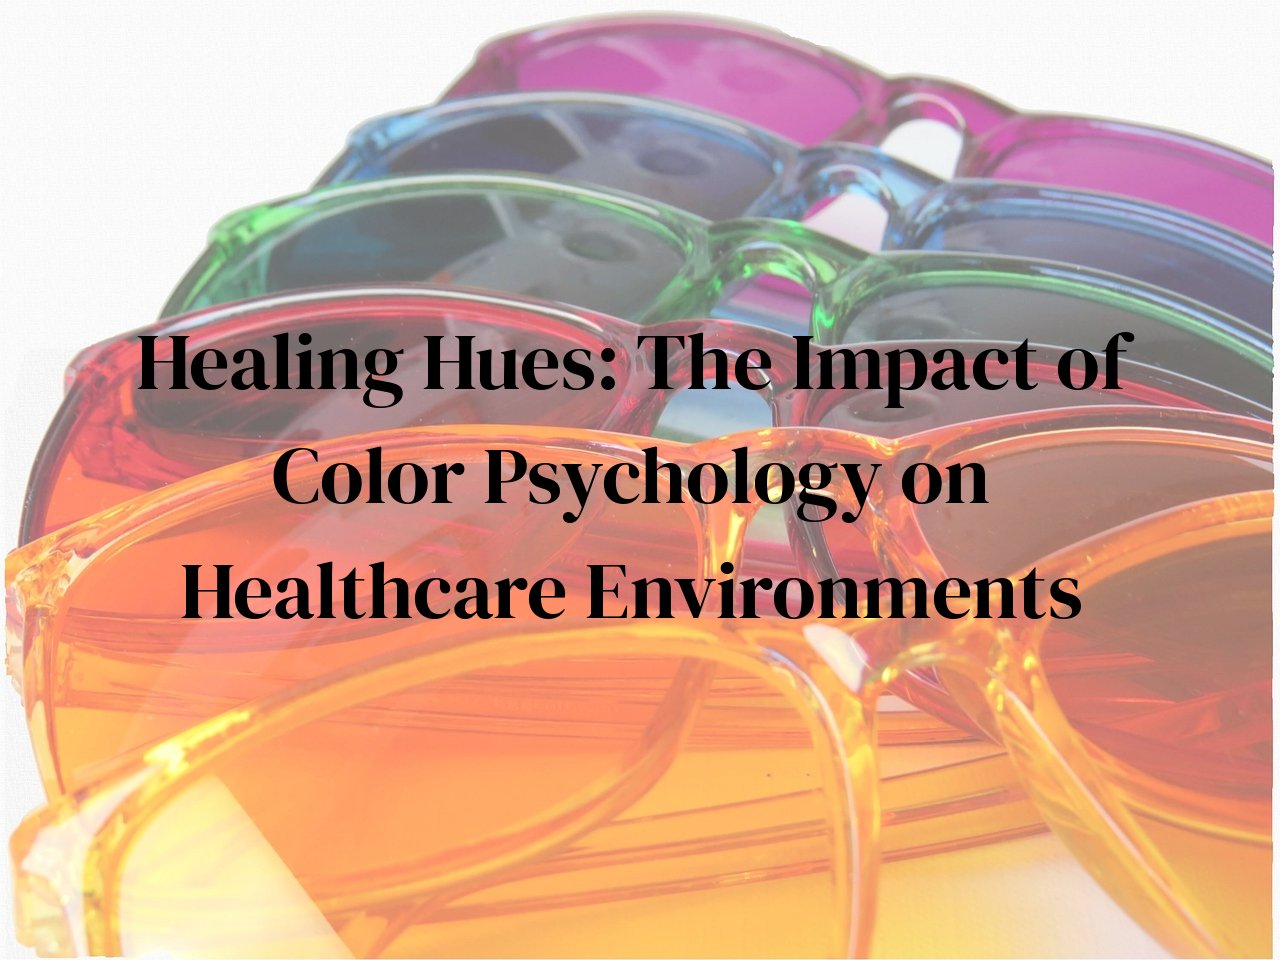 Healing Hues: The Impact of Color Psychology on Healthcare Environments